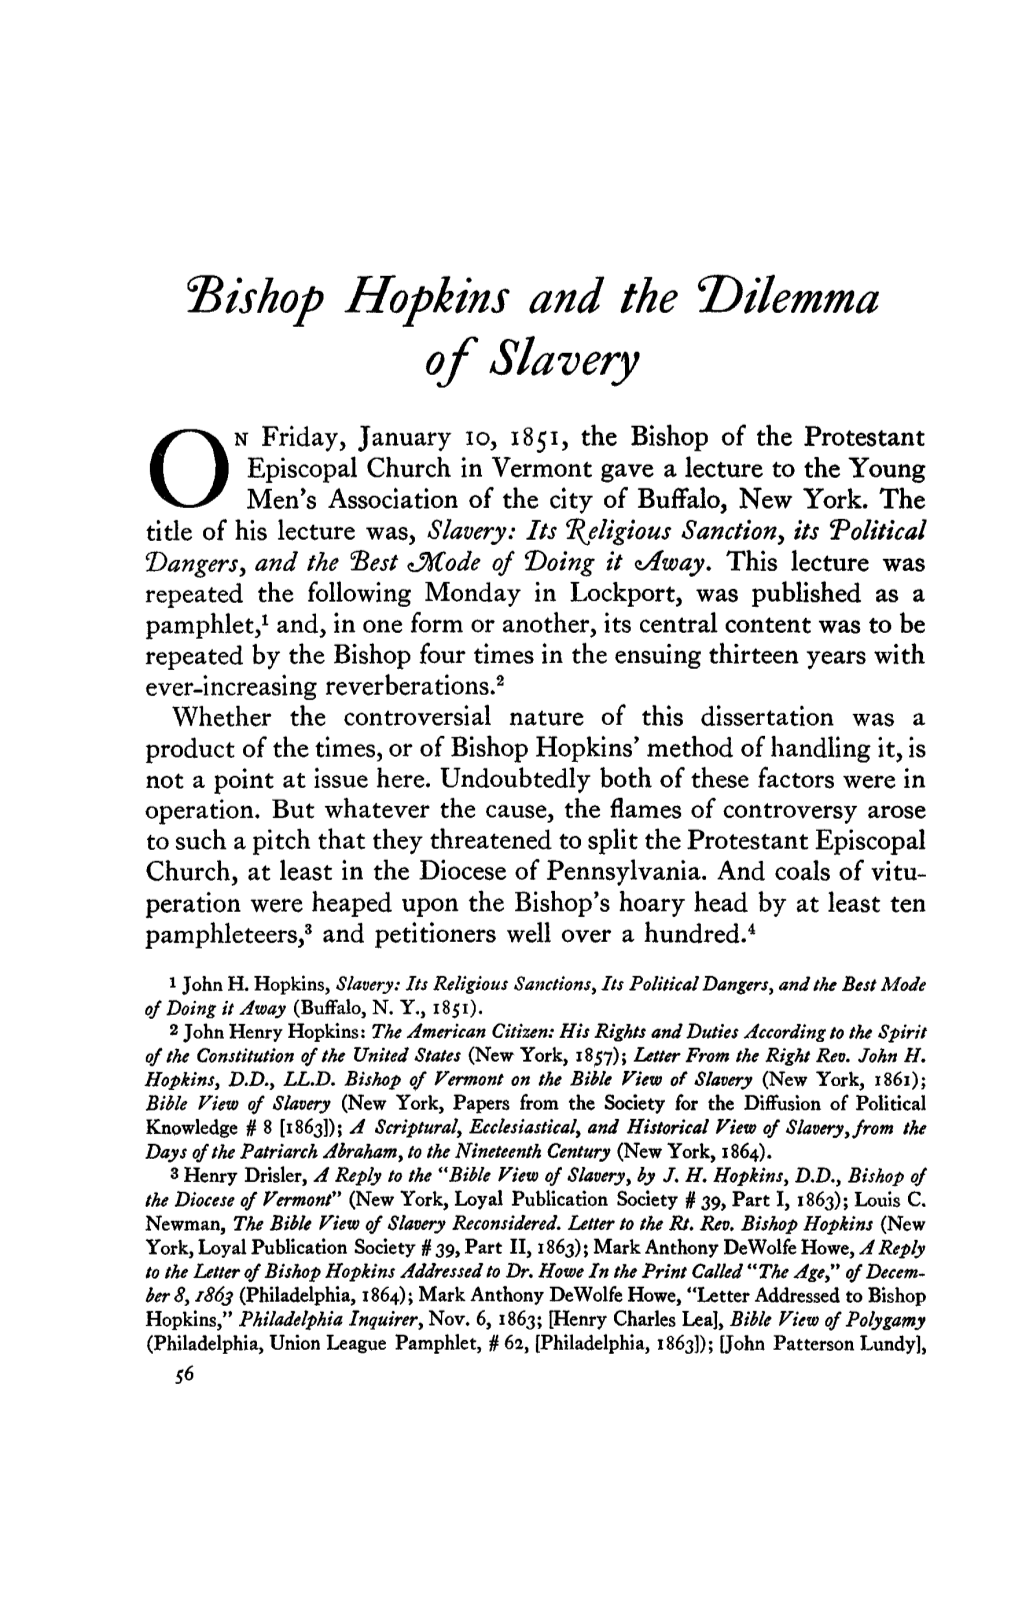 Bishop Hopkins and the "Dilemma of Slavery